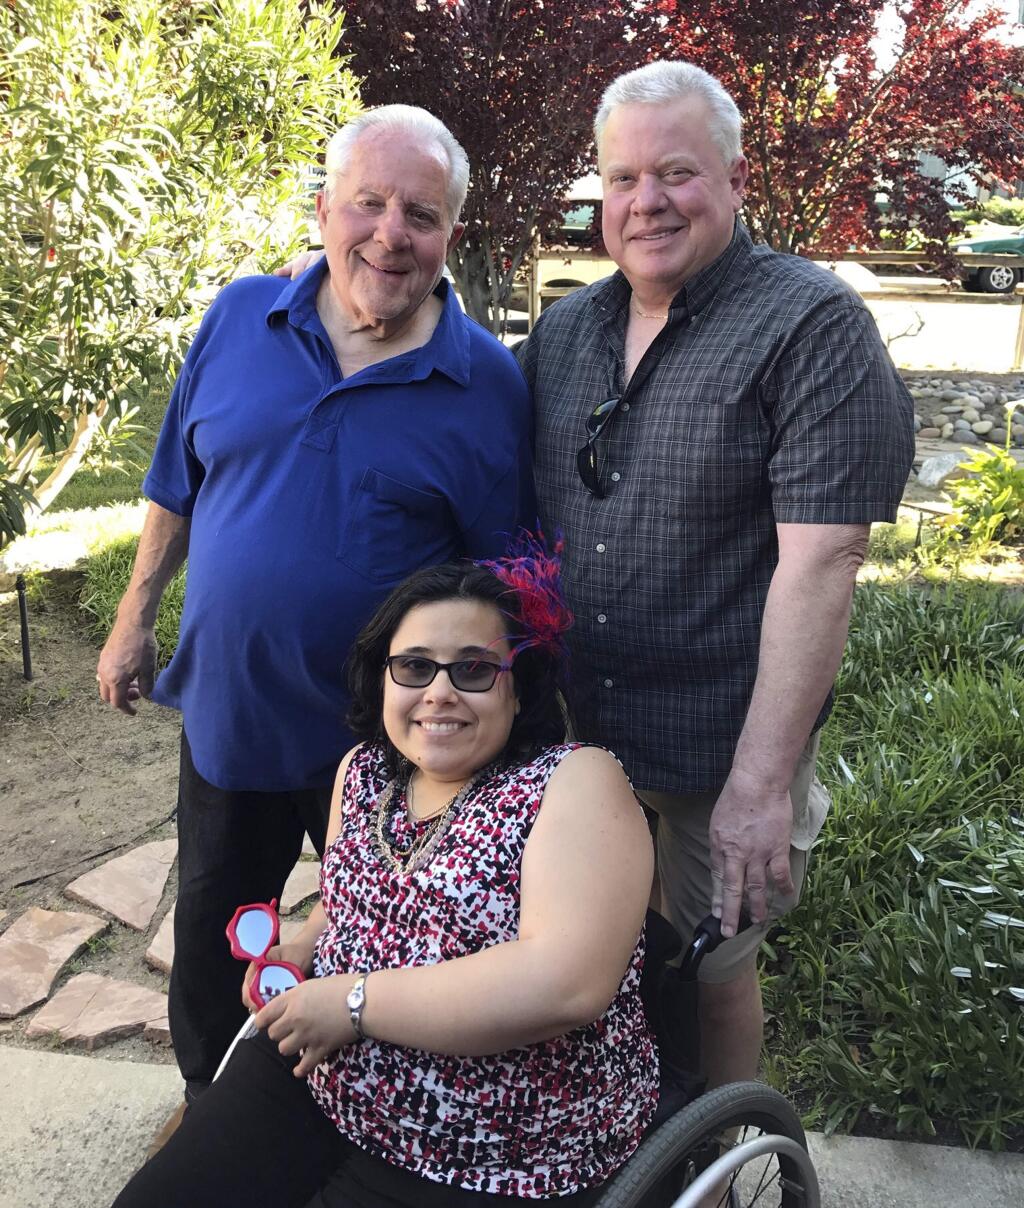 This April, 2017 photo shows Christina Hanson, with her grandfather Dick Hanson, left, and her father Michael Hanson, in Oakley, Calif. Christina Hanson, 27, died in the Tubbs fire in Santa Rosa and Michael Hanson was severely burned . (Brittney Vinculado via AP)